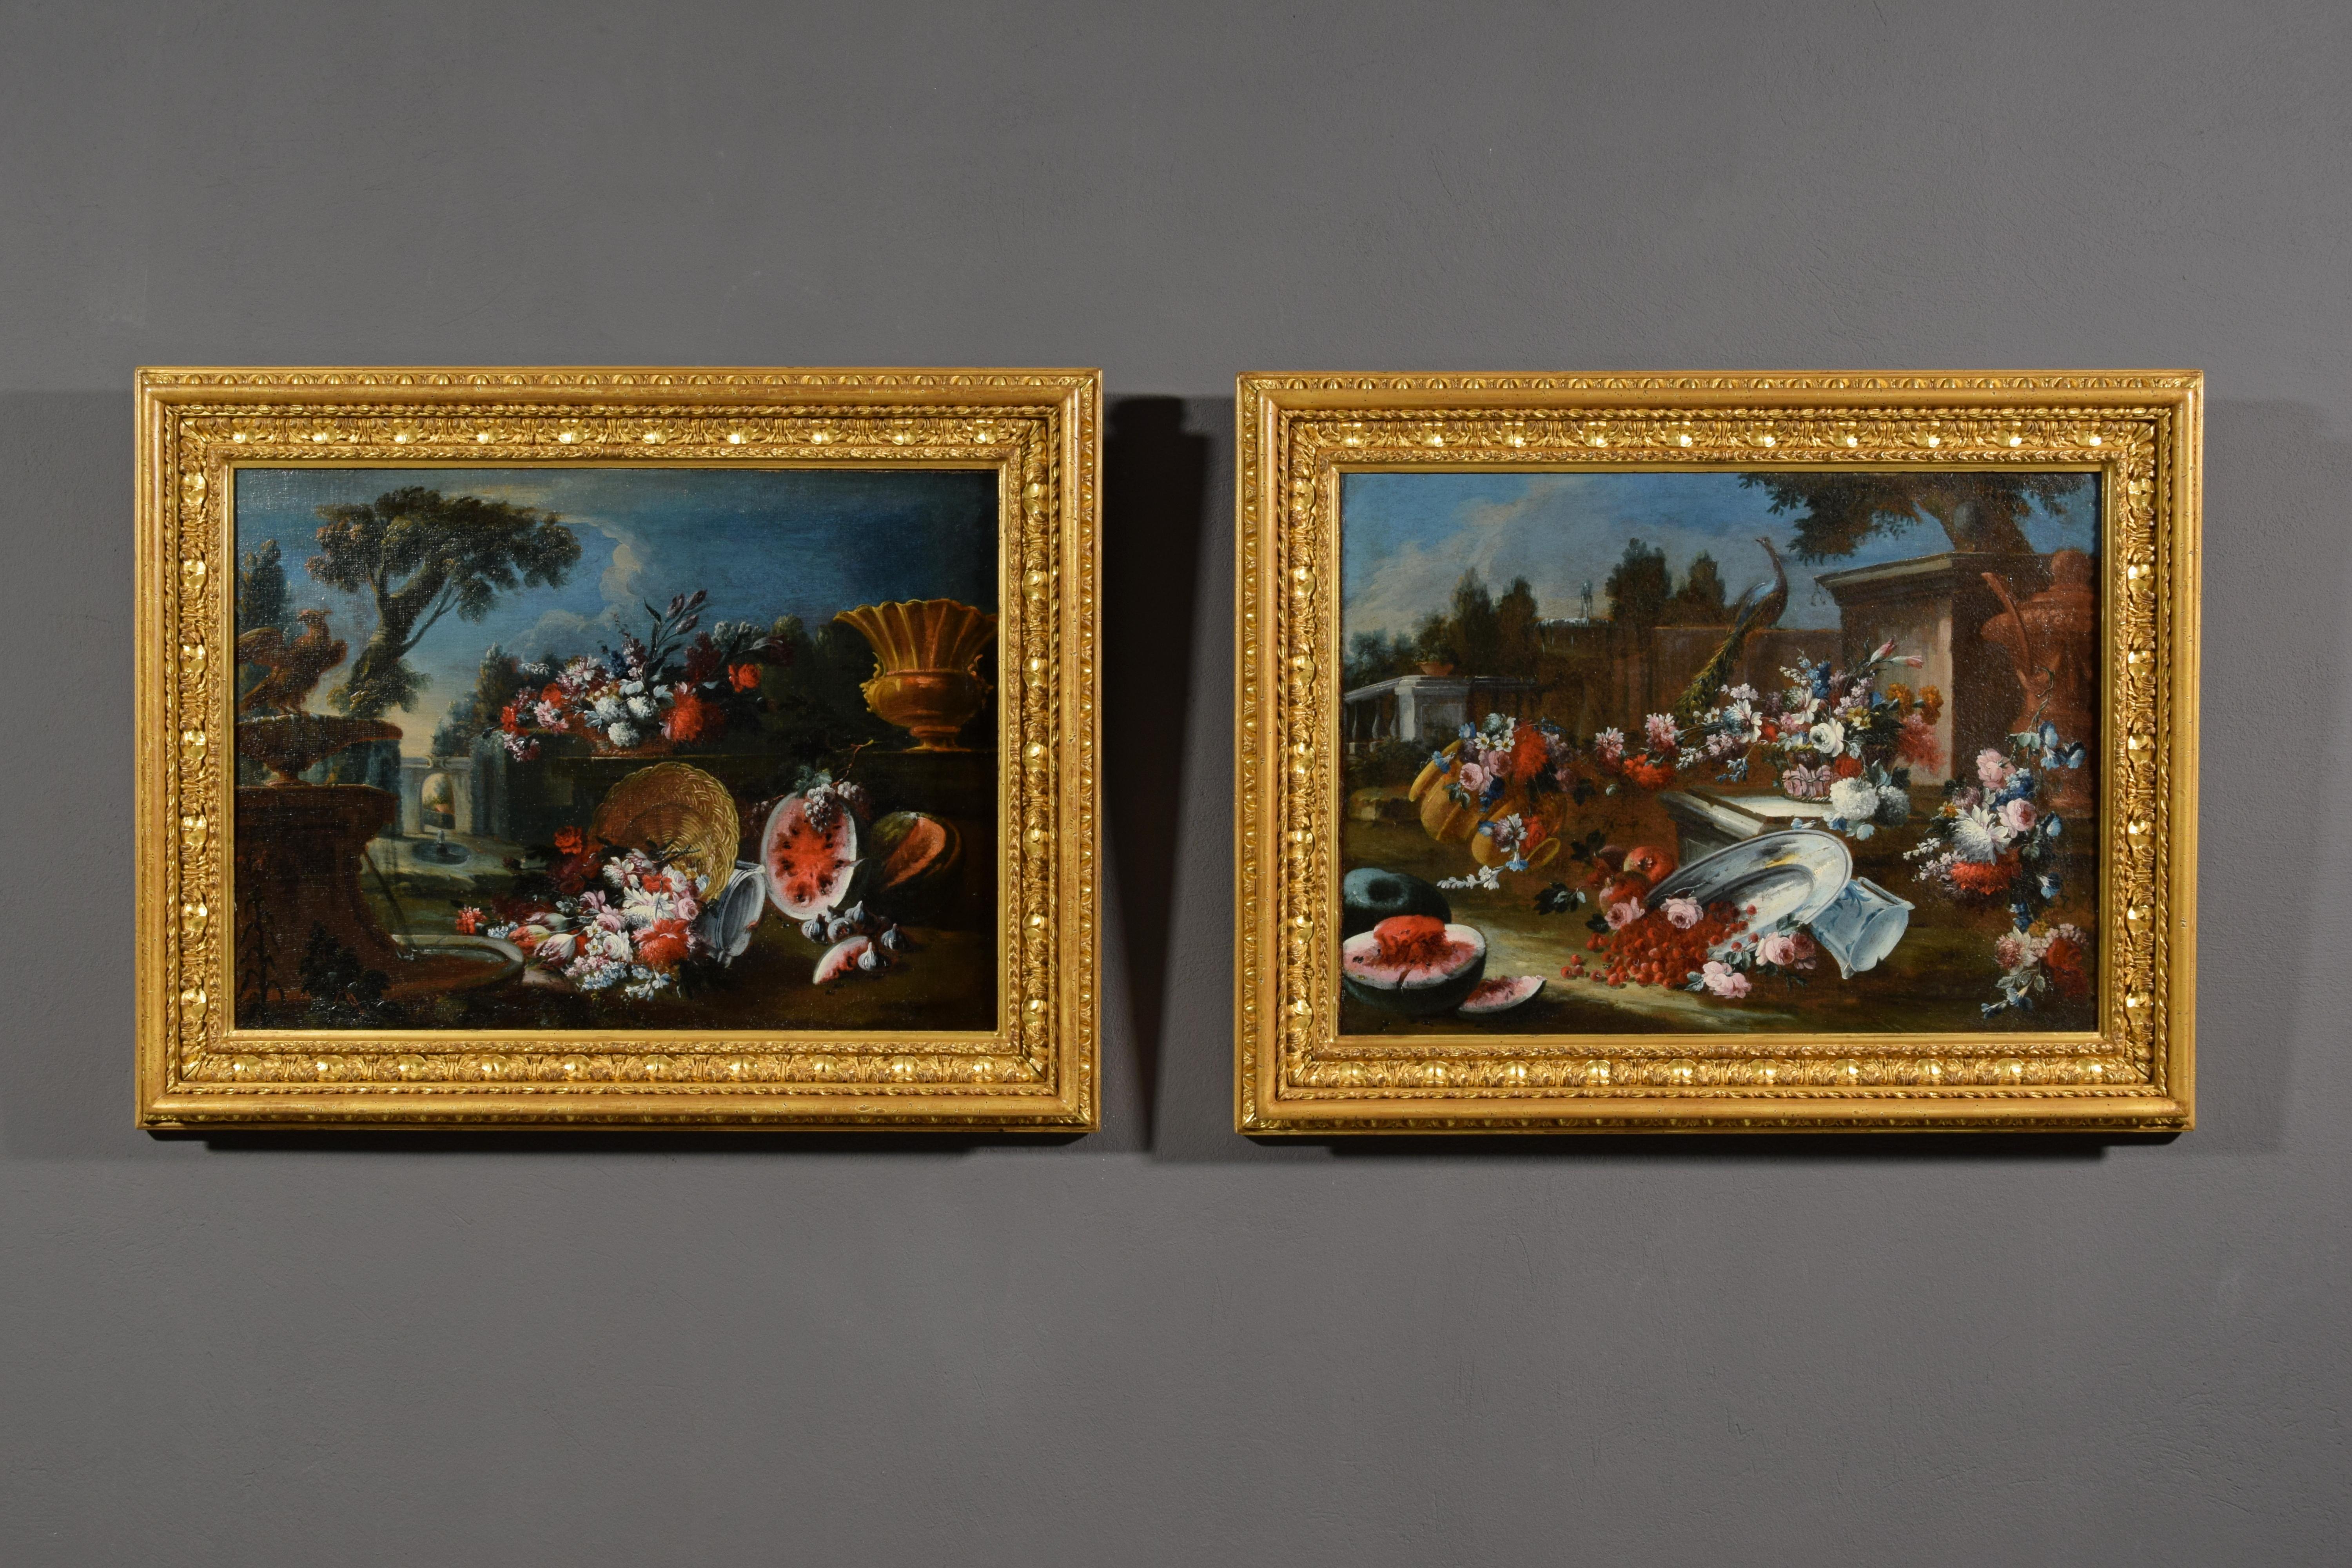 Francesco Lavagna (Italy, Naples 1684-1724)

Pair of paintings depicting Still Life composition of flowers and watermelon and garden in the background

The paintings, beautifully made and in good condition, depict sumptuous compositions of flowers